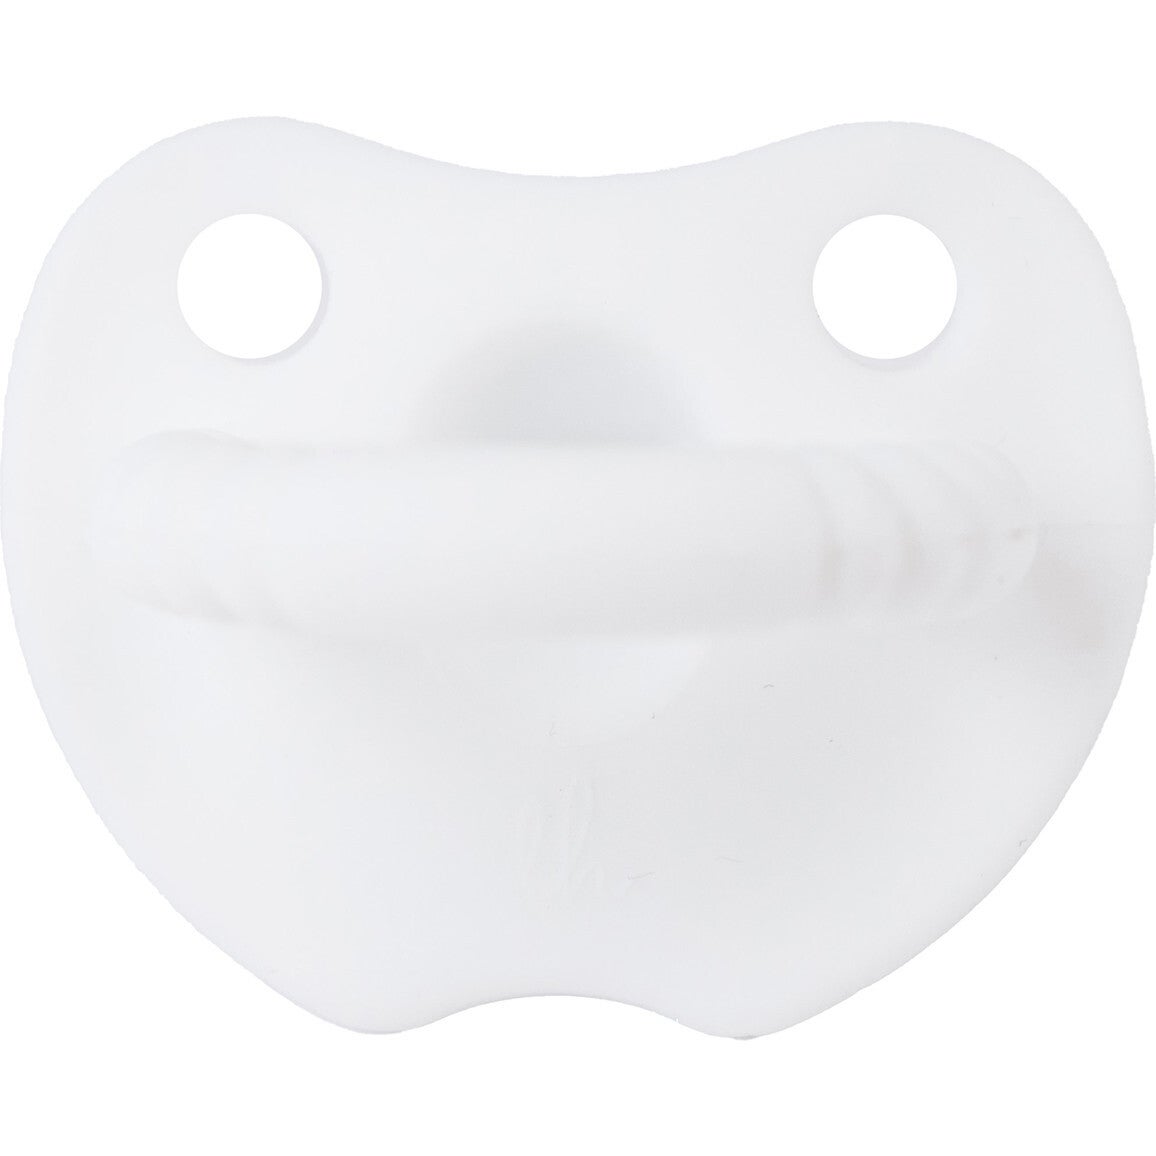 Silicone Soother (Pacifier)- Round- (6 Color Options)